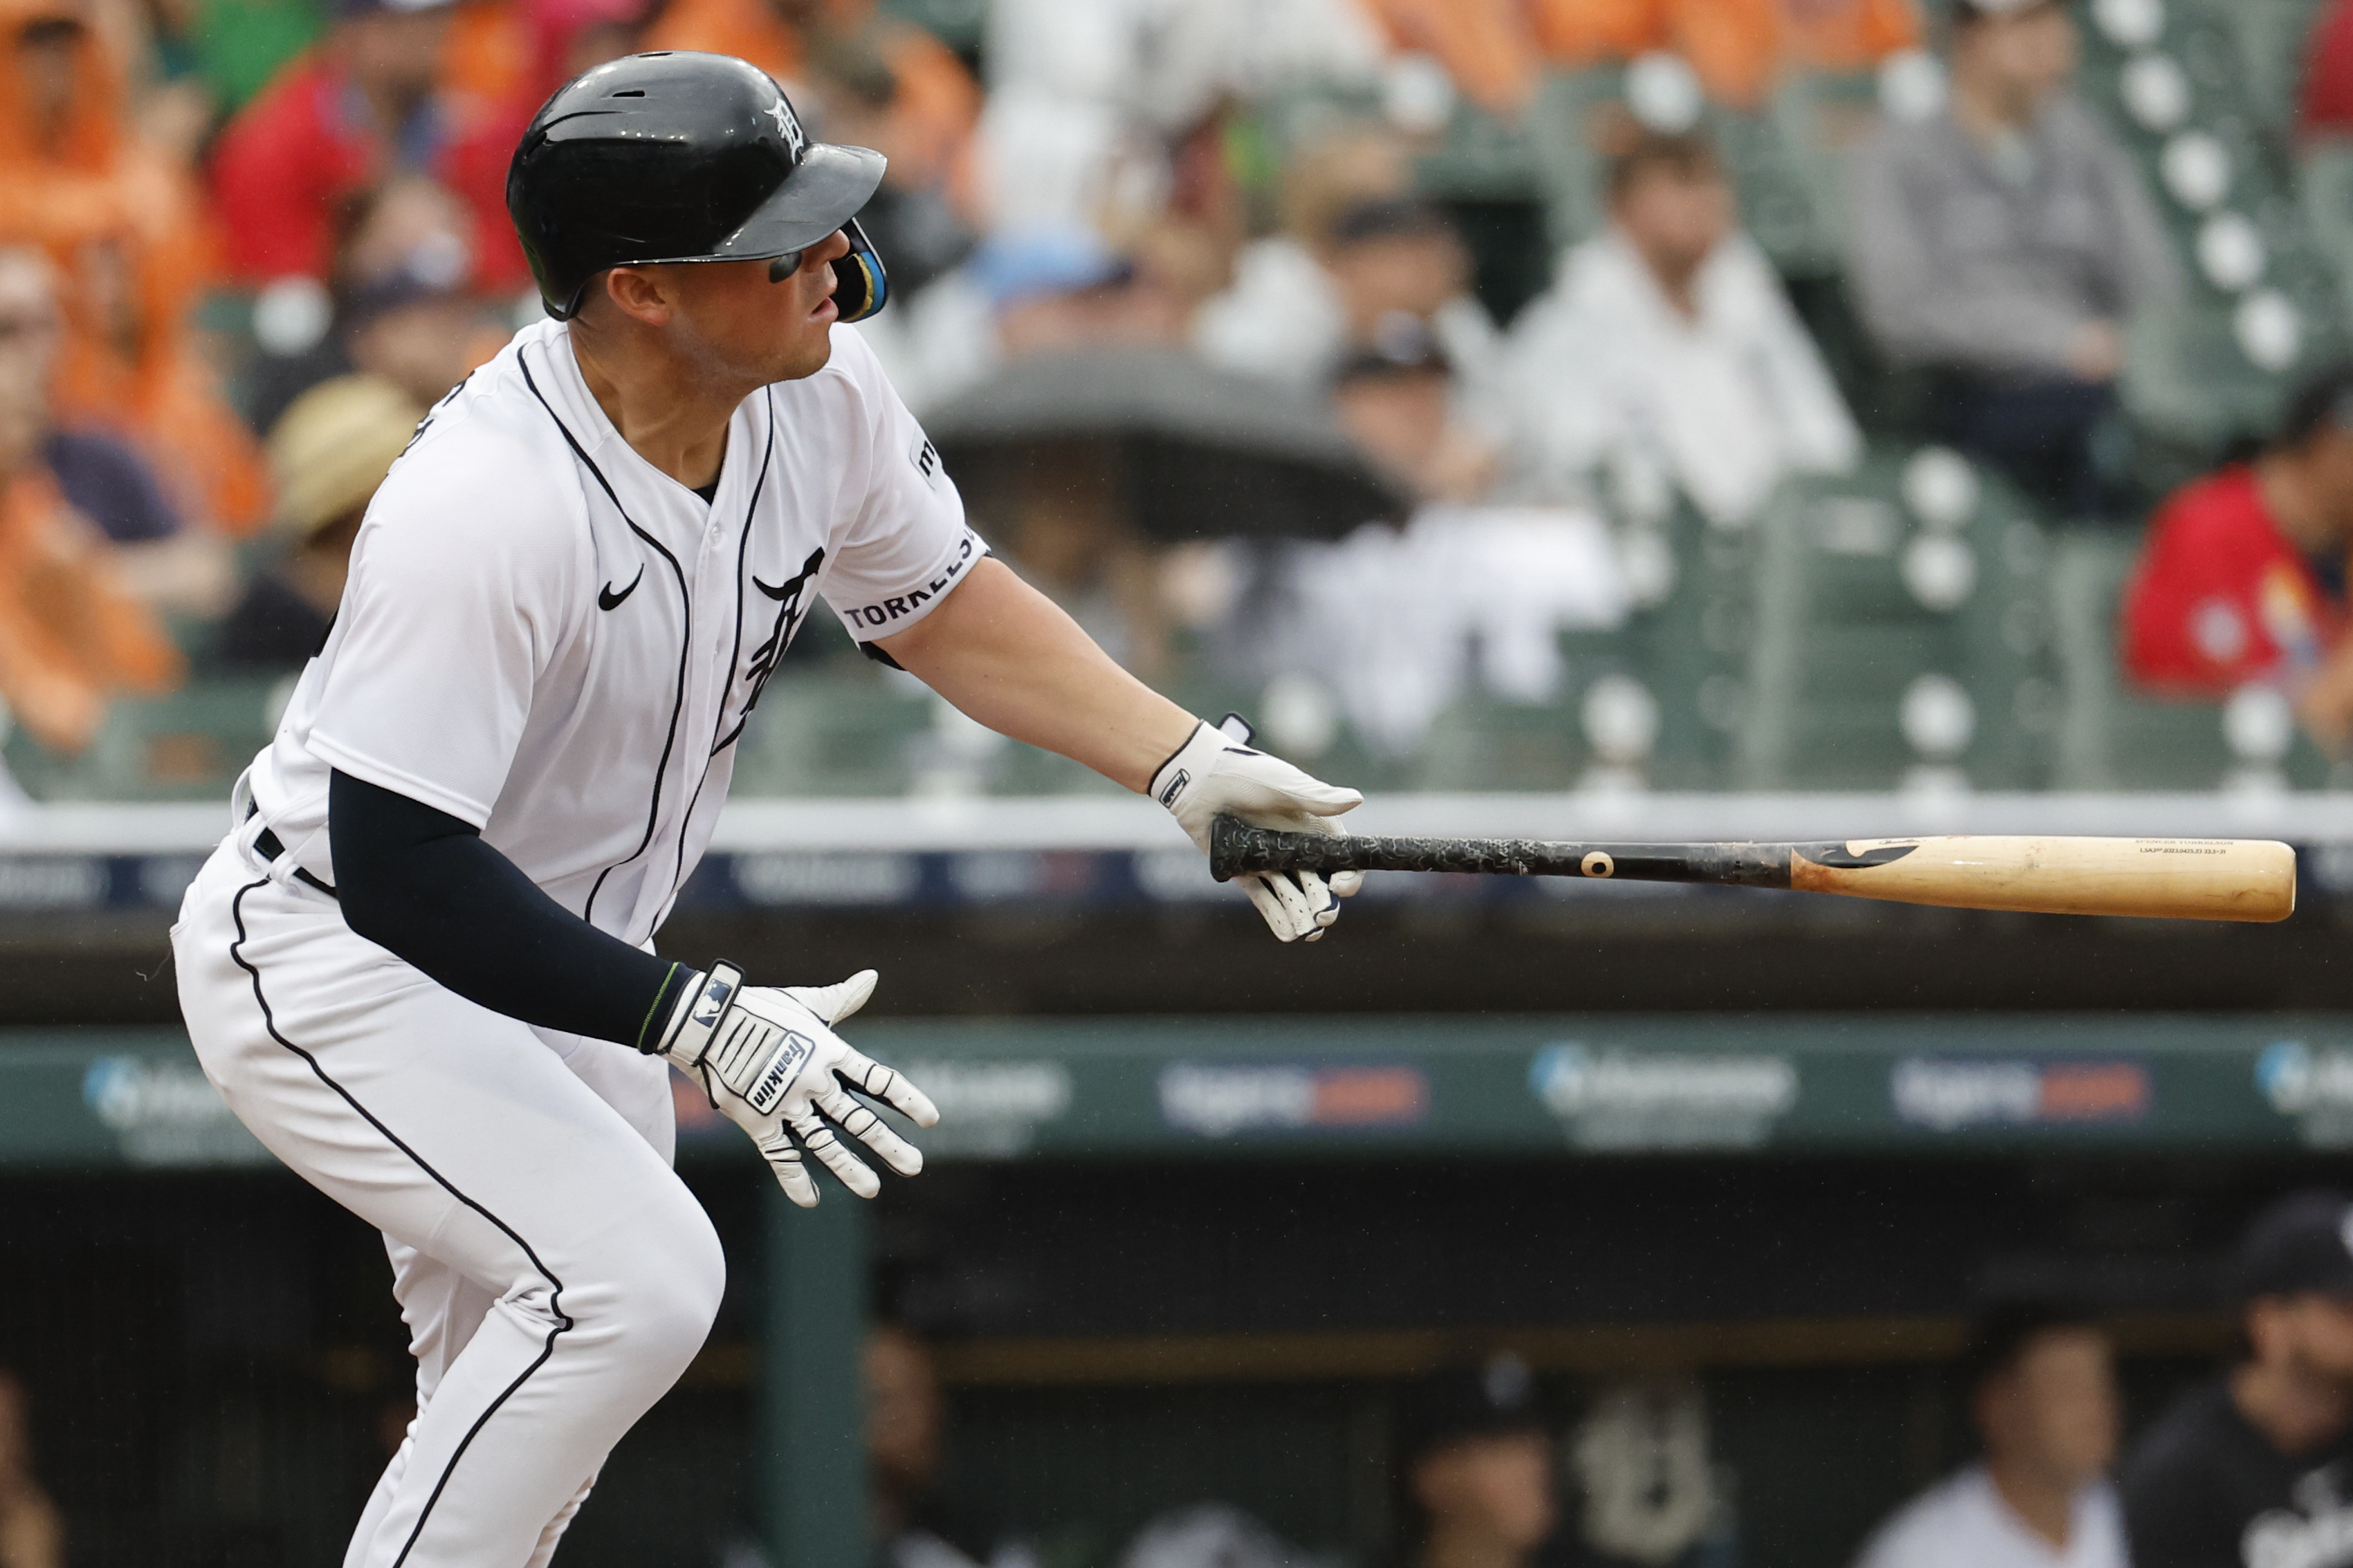 Detroit Tigers blanked by New York Yankees, 13-0 – The Oakland Press